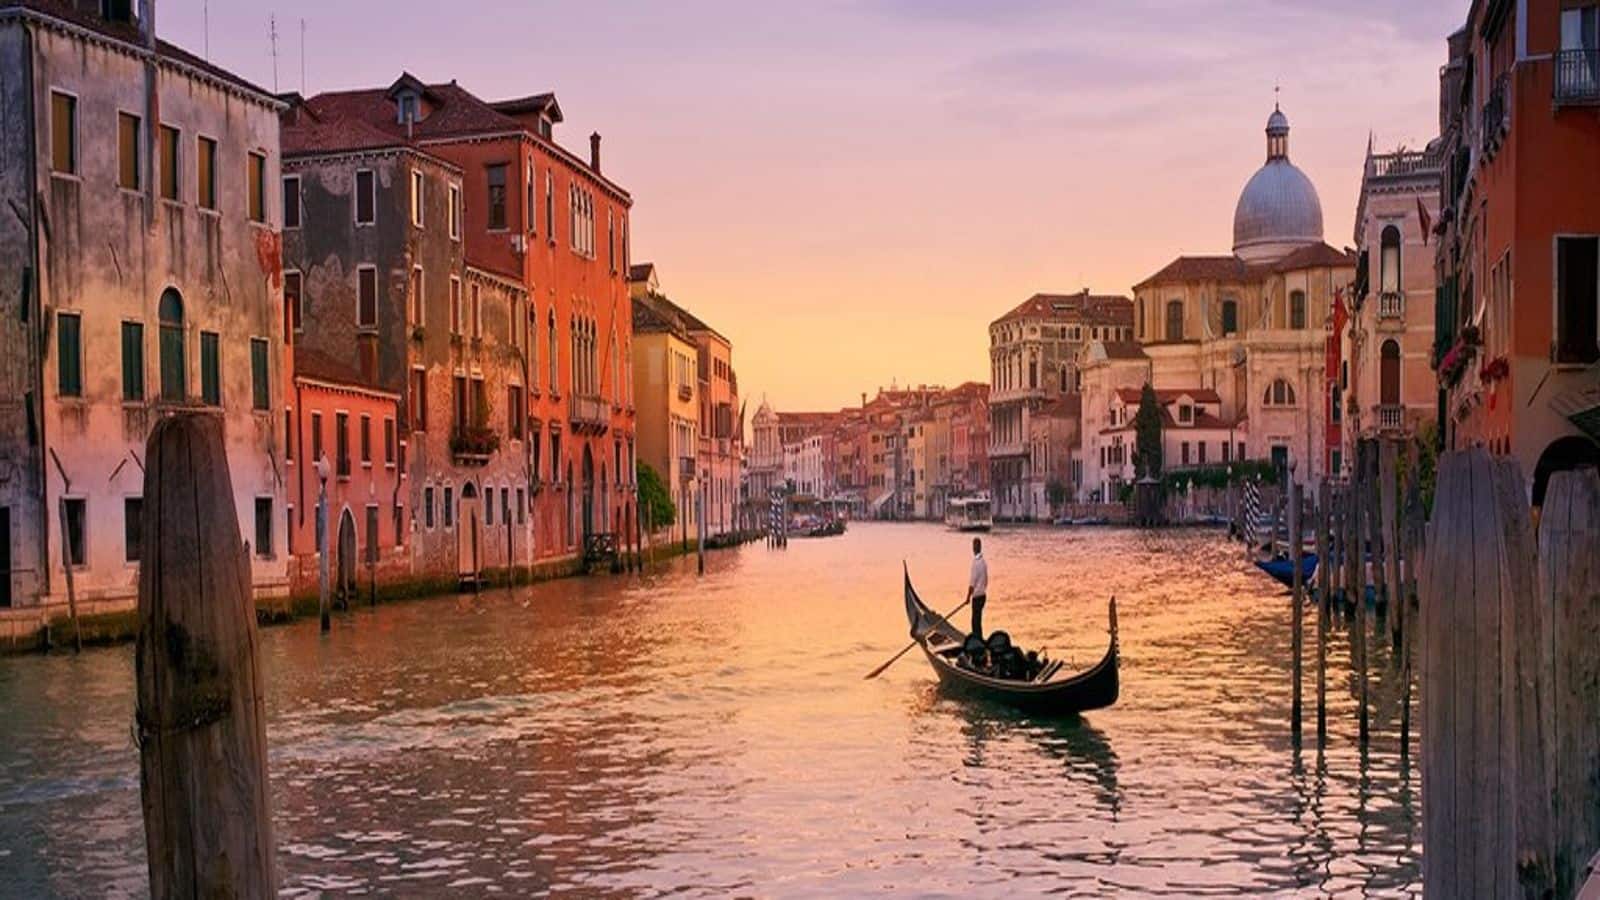 Don't miss out on gondola rides when in Venice